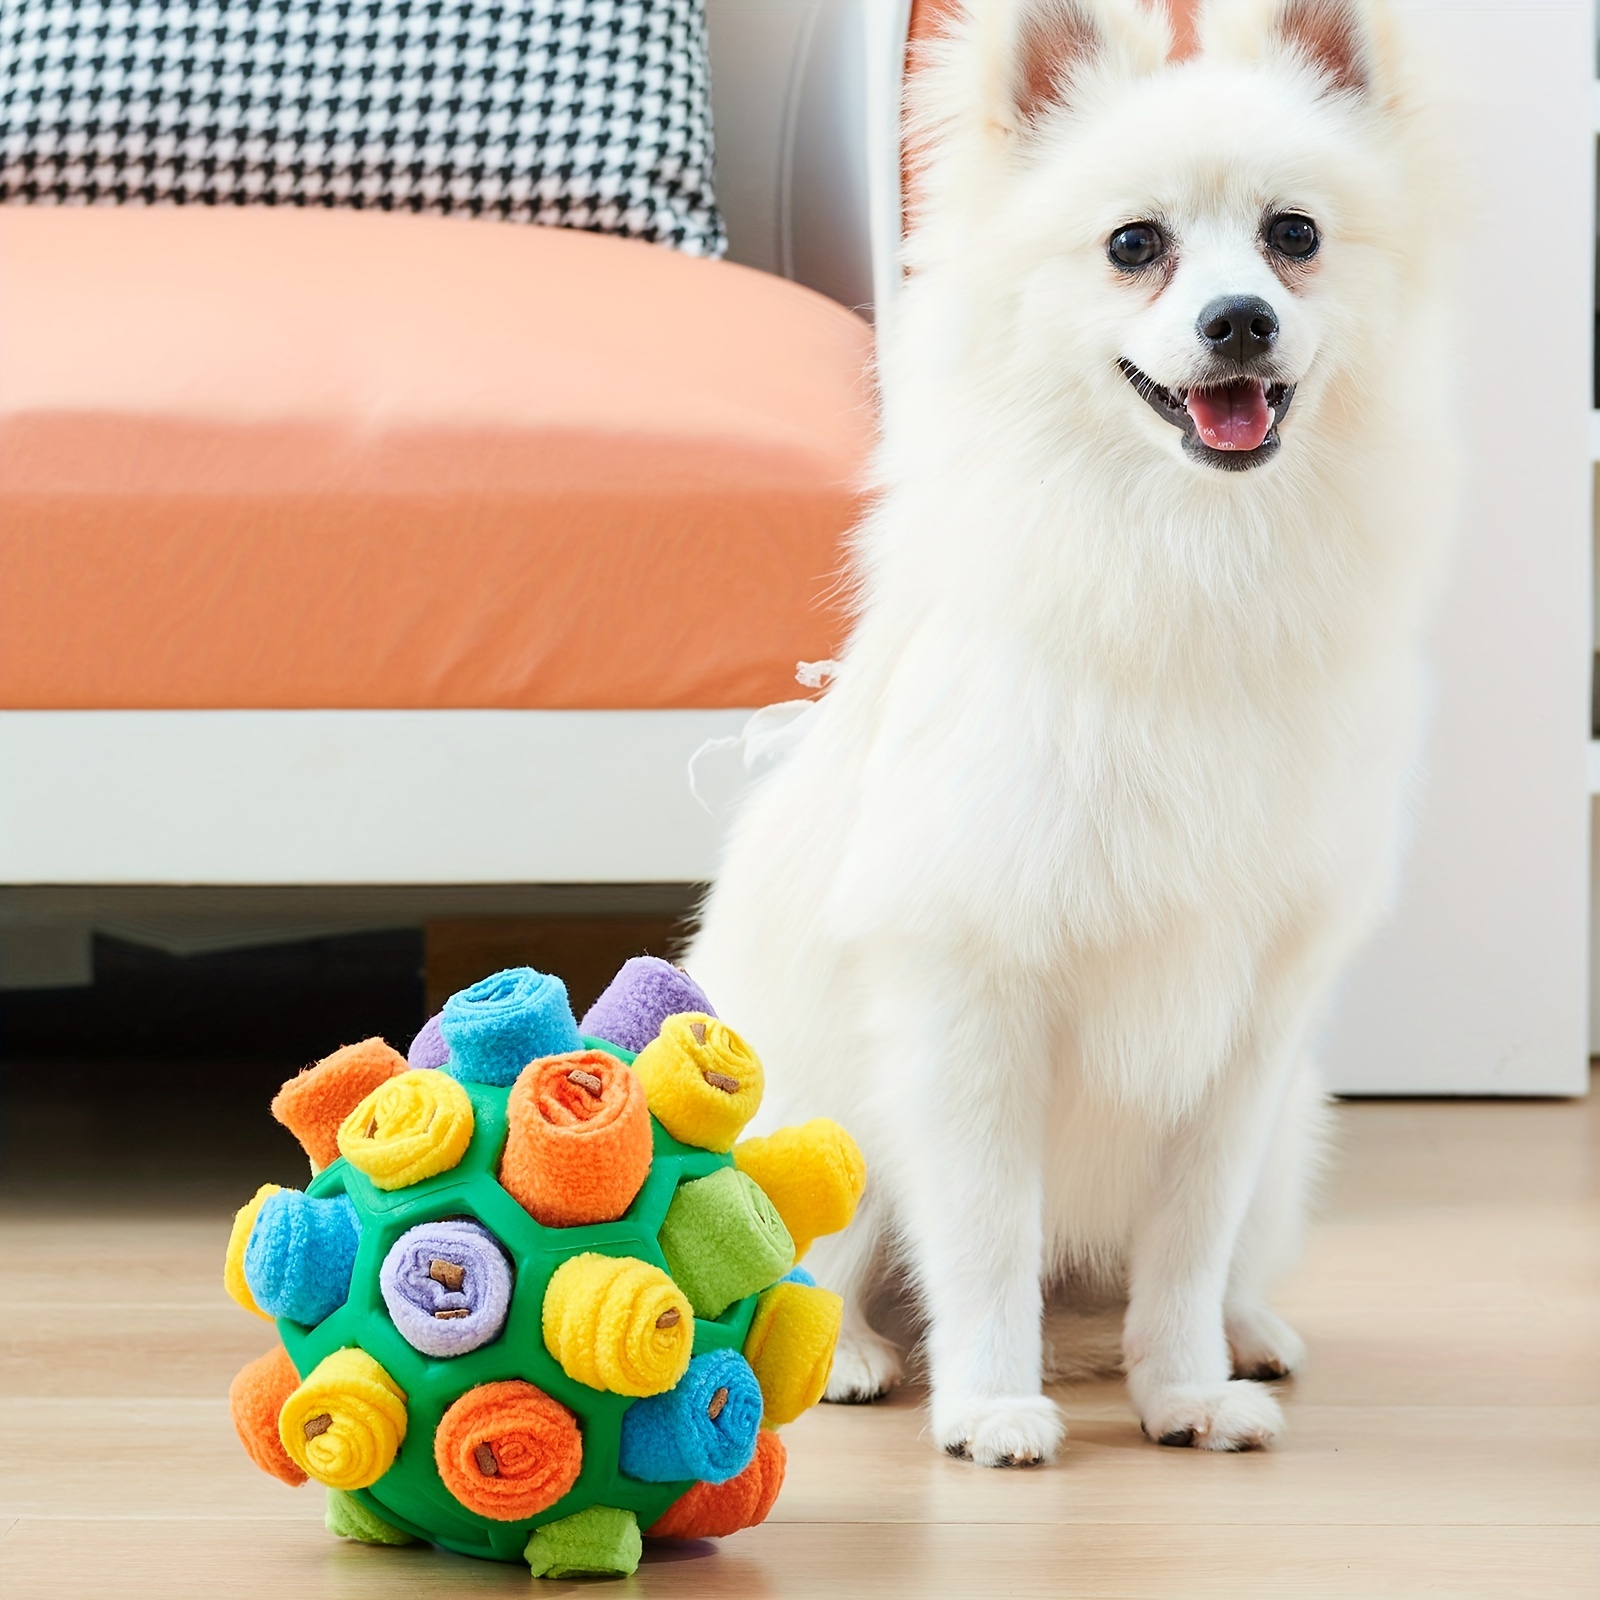 Snuffle Mat for Dogs,Interactive Dog Toys Ball,Dog Puzzle Toy,Dog